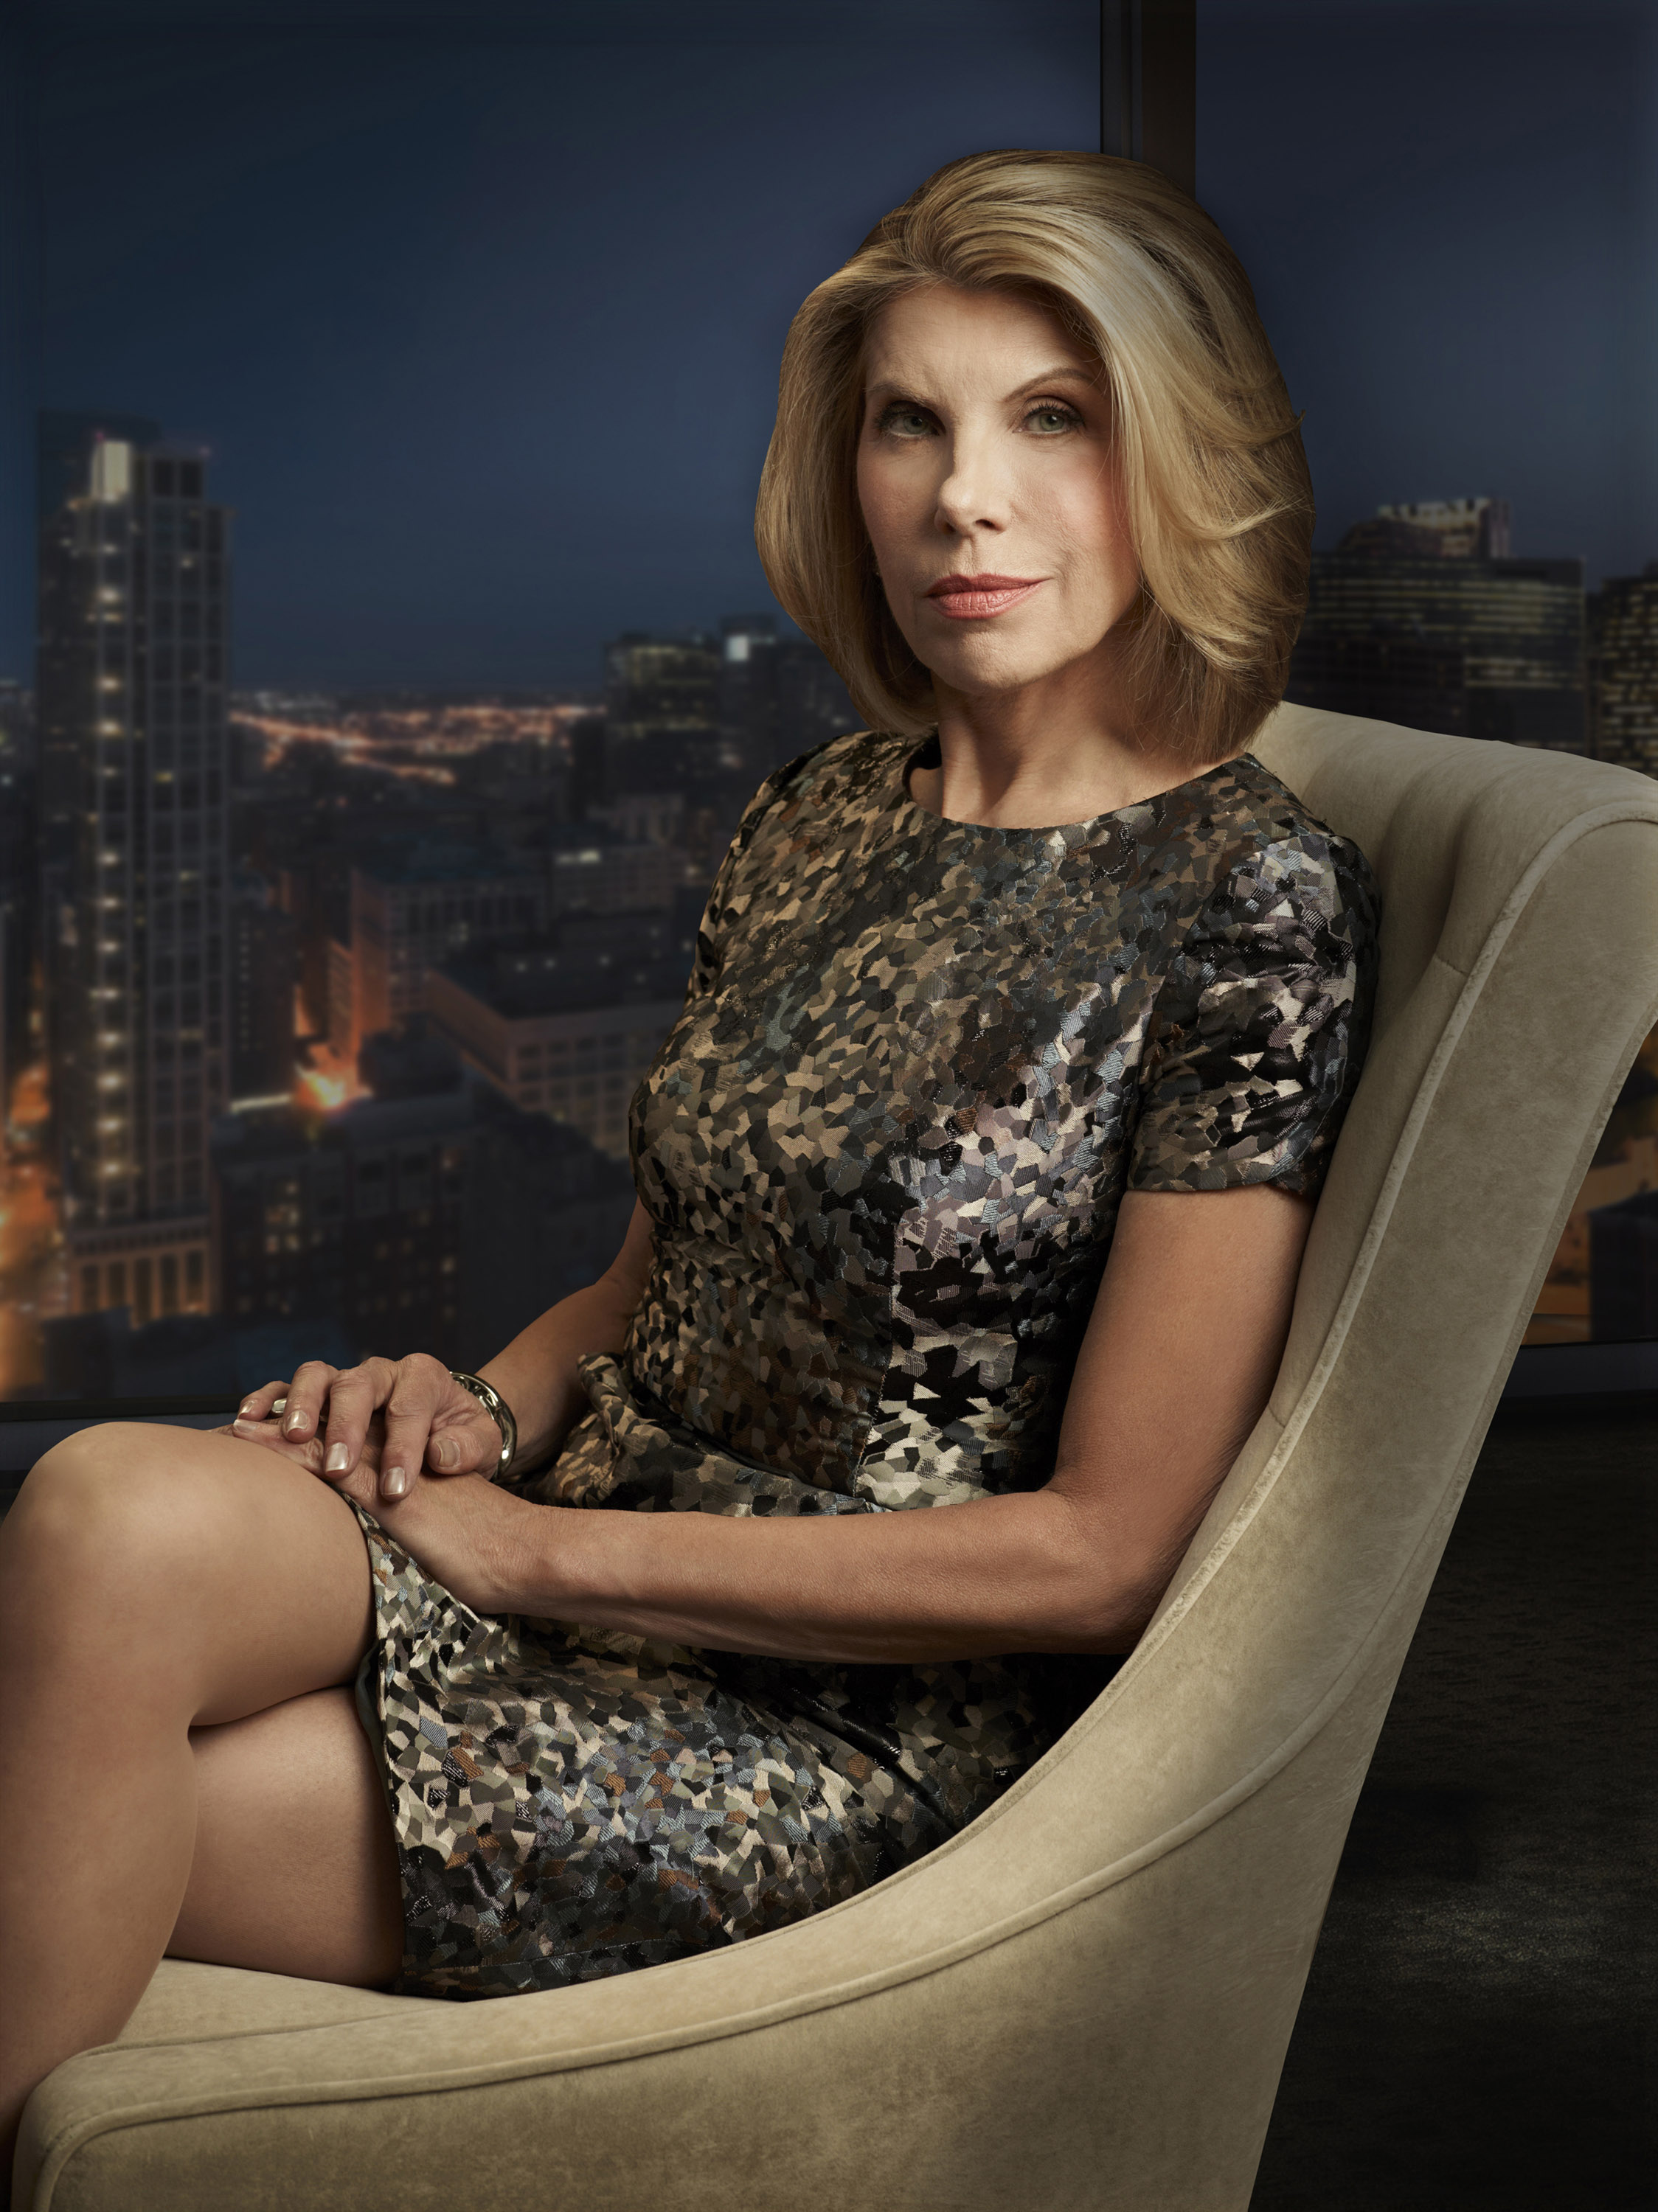 Pictures of Christine Baranski, Picture #9114 - Pictures Of Celebrities2248 x 3000